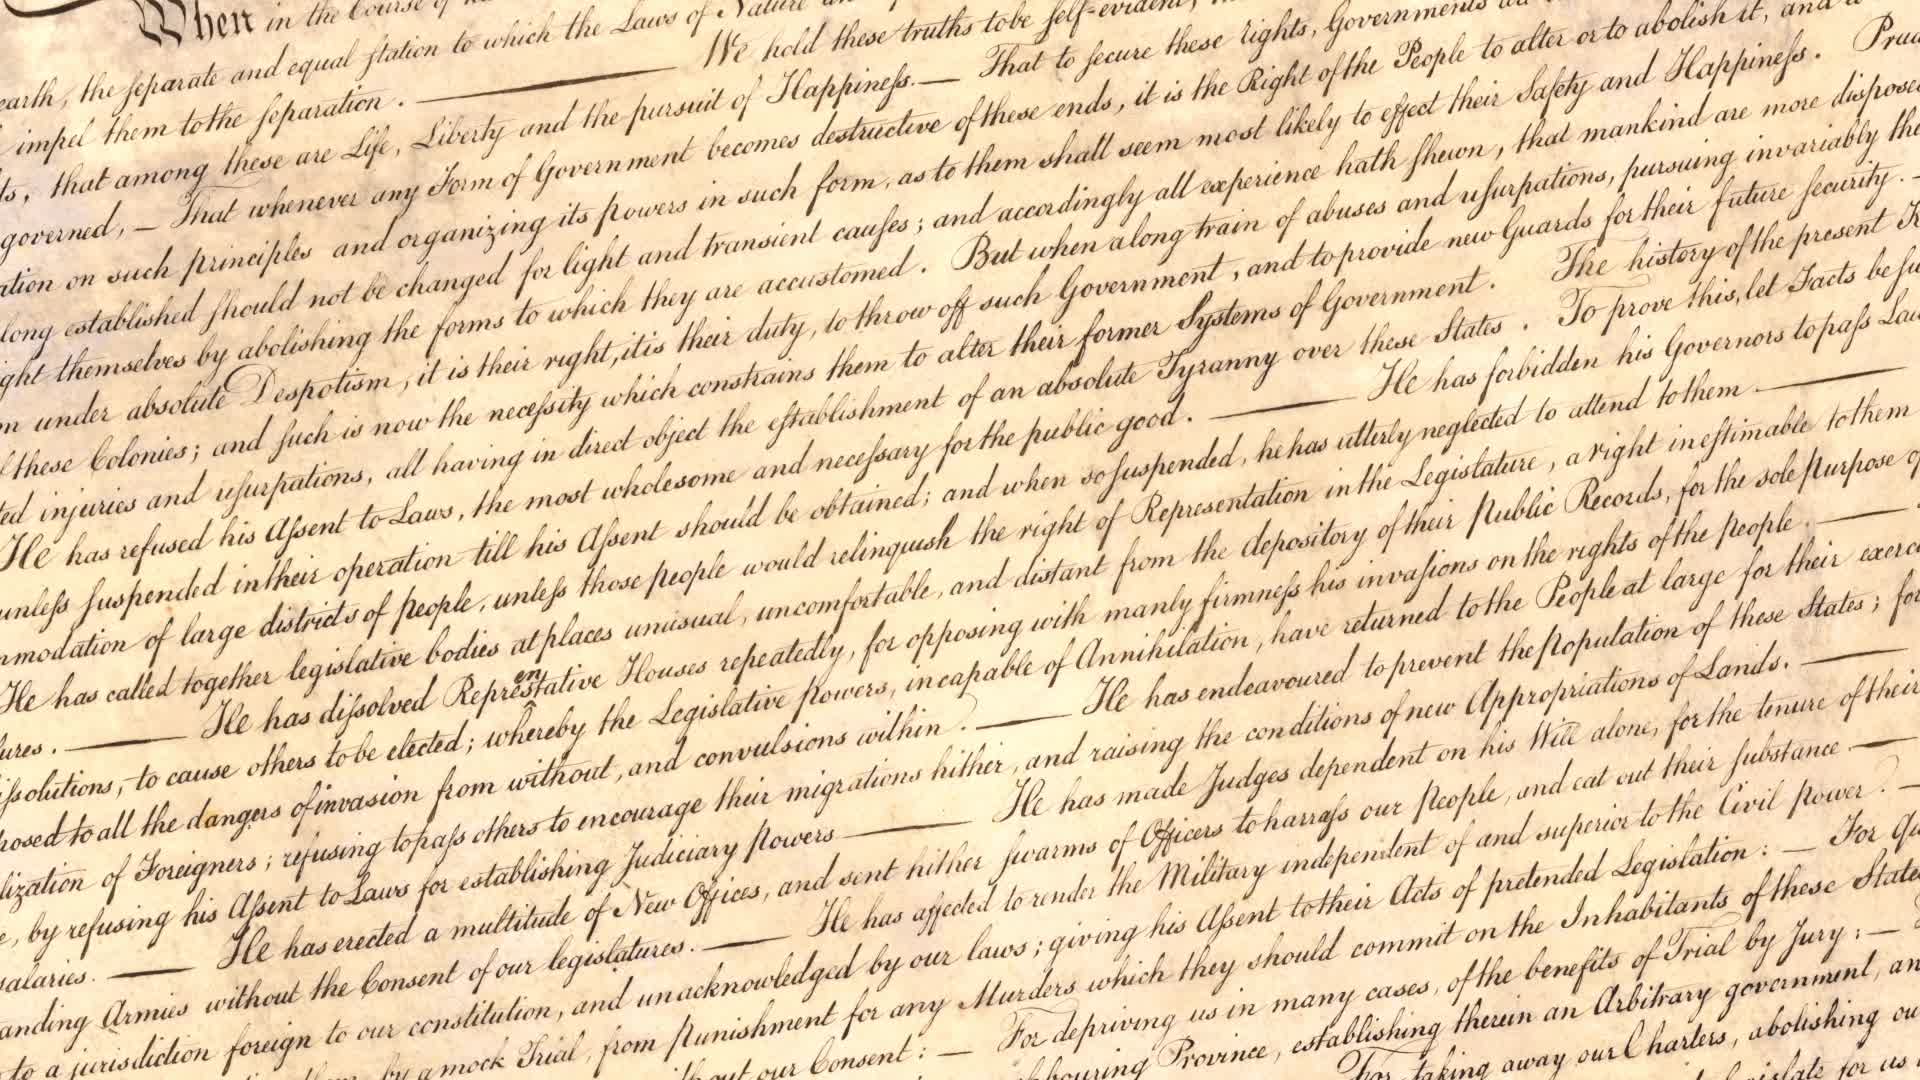 Declaration of Independence, Colonial Flag Footage